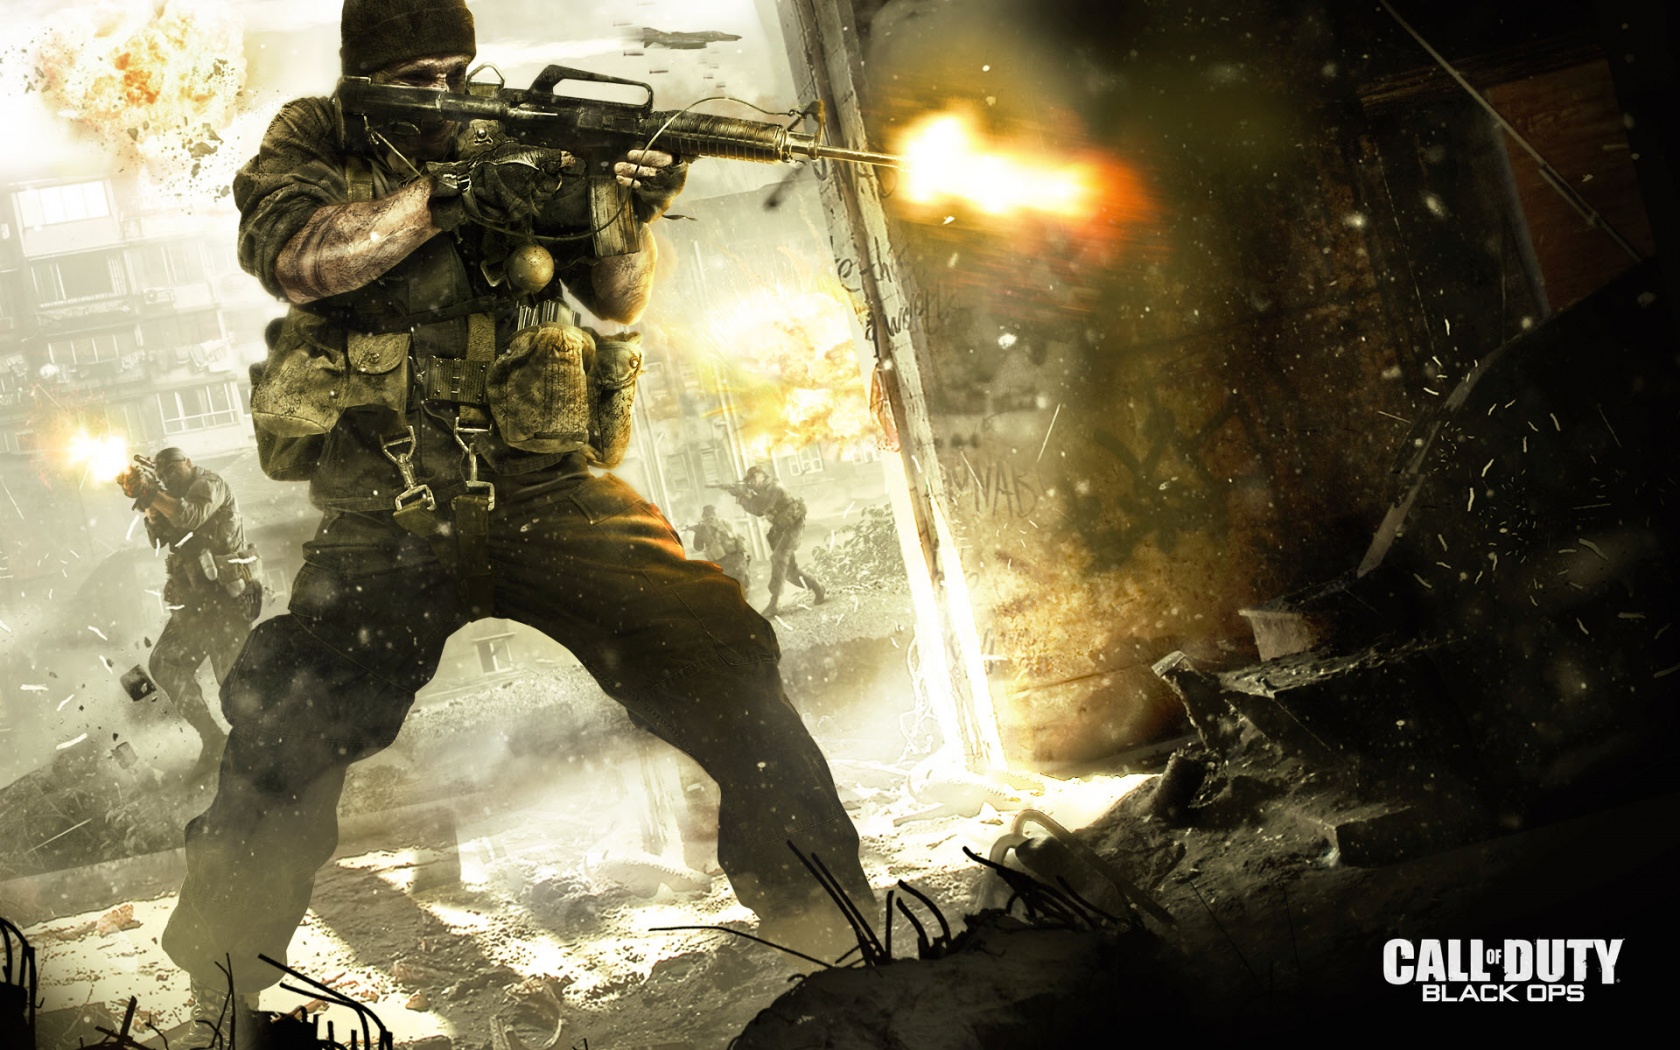 Call of duty 2 download free. full version pc kickass